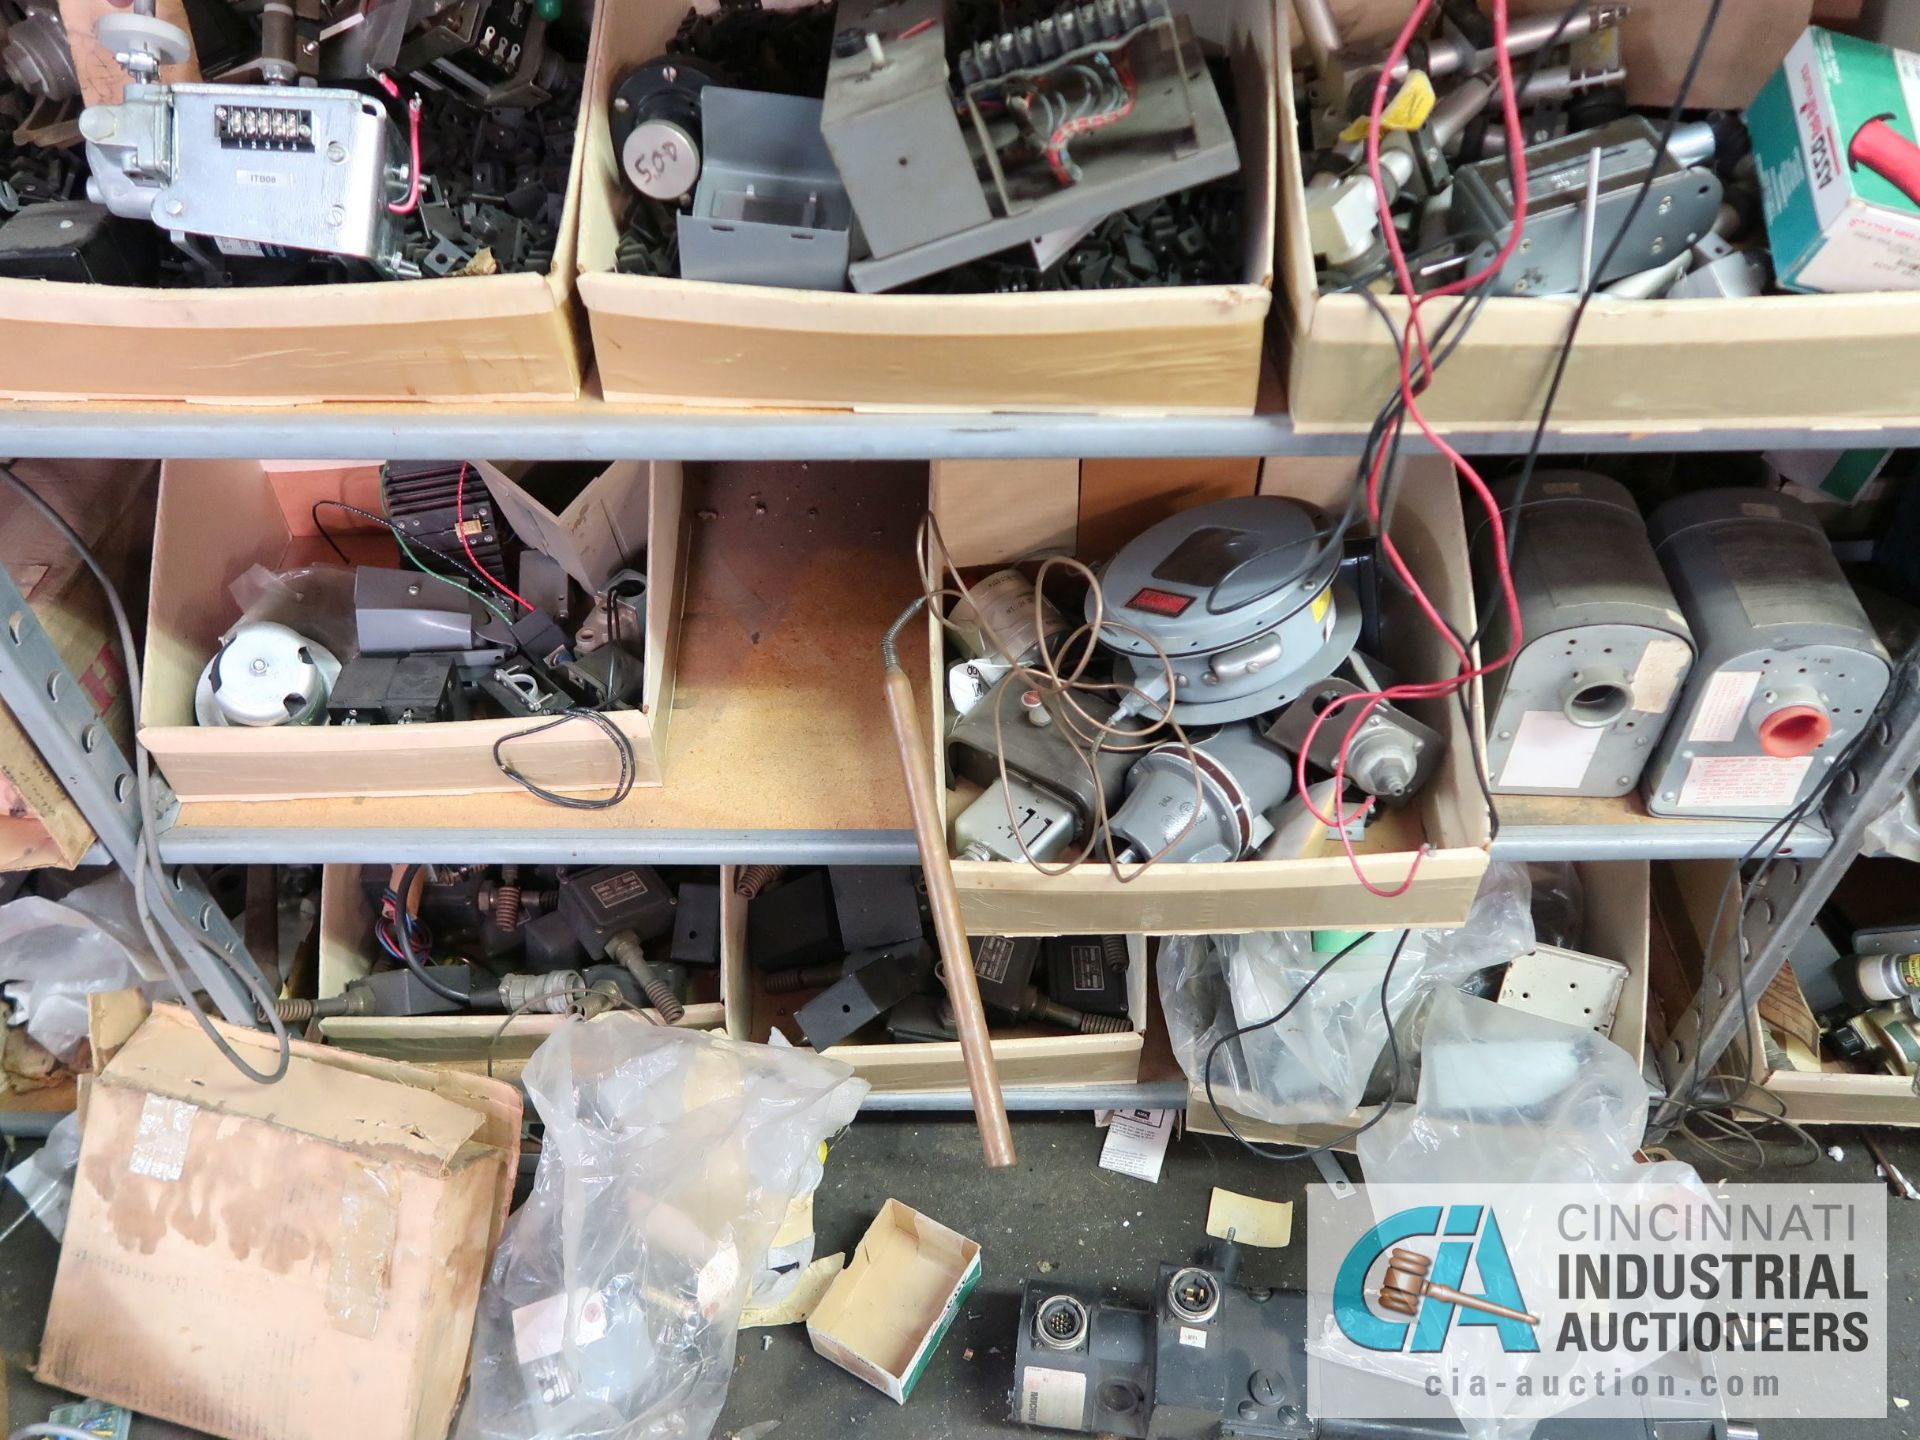 CONTENTS OF (16) SHELVES INCLUDING MISCELLANEOUS VALVES, THERMOSTATS, ANALYZERS, ELECTRICAL, CONTROL - Image 9 of 47